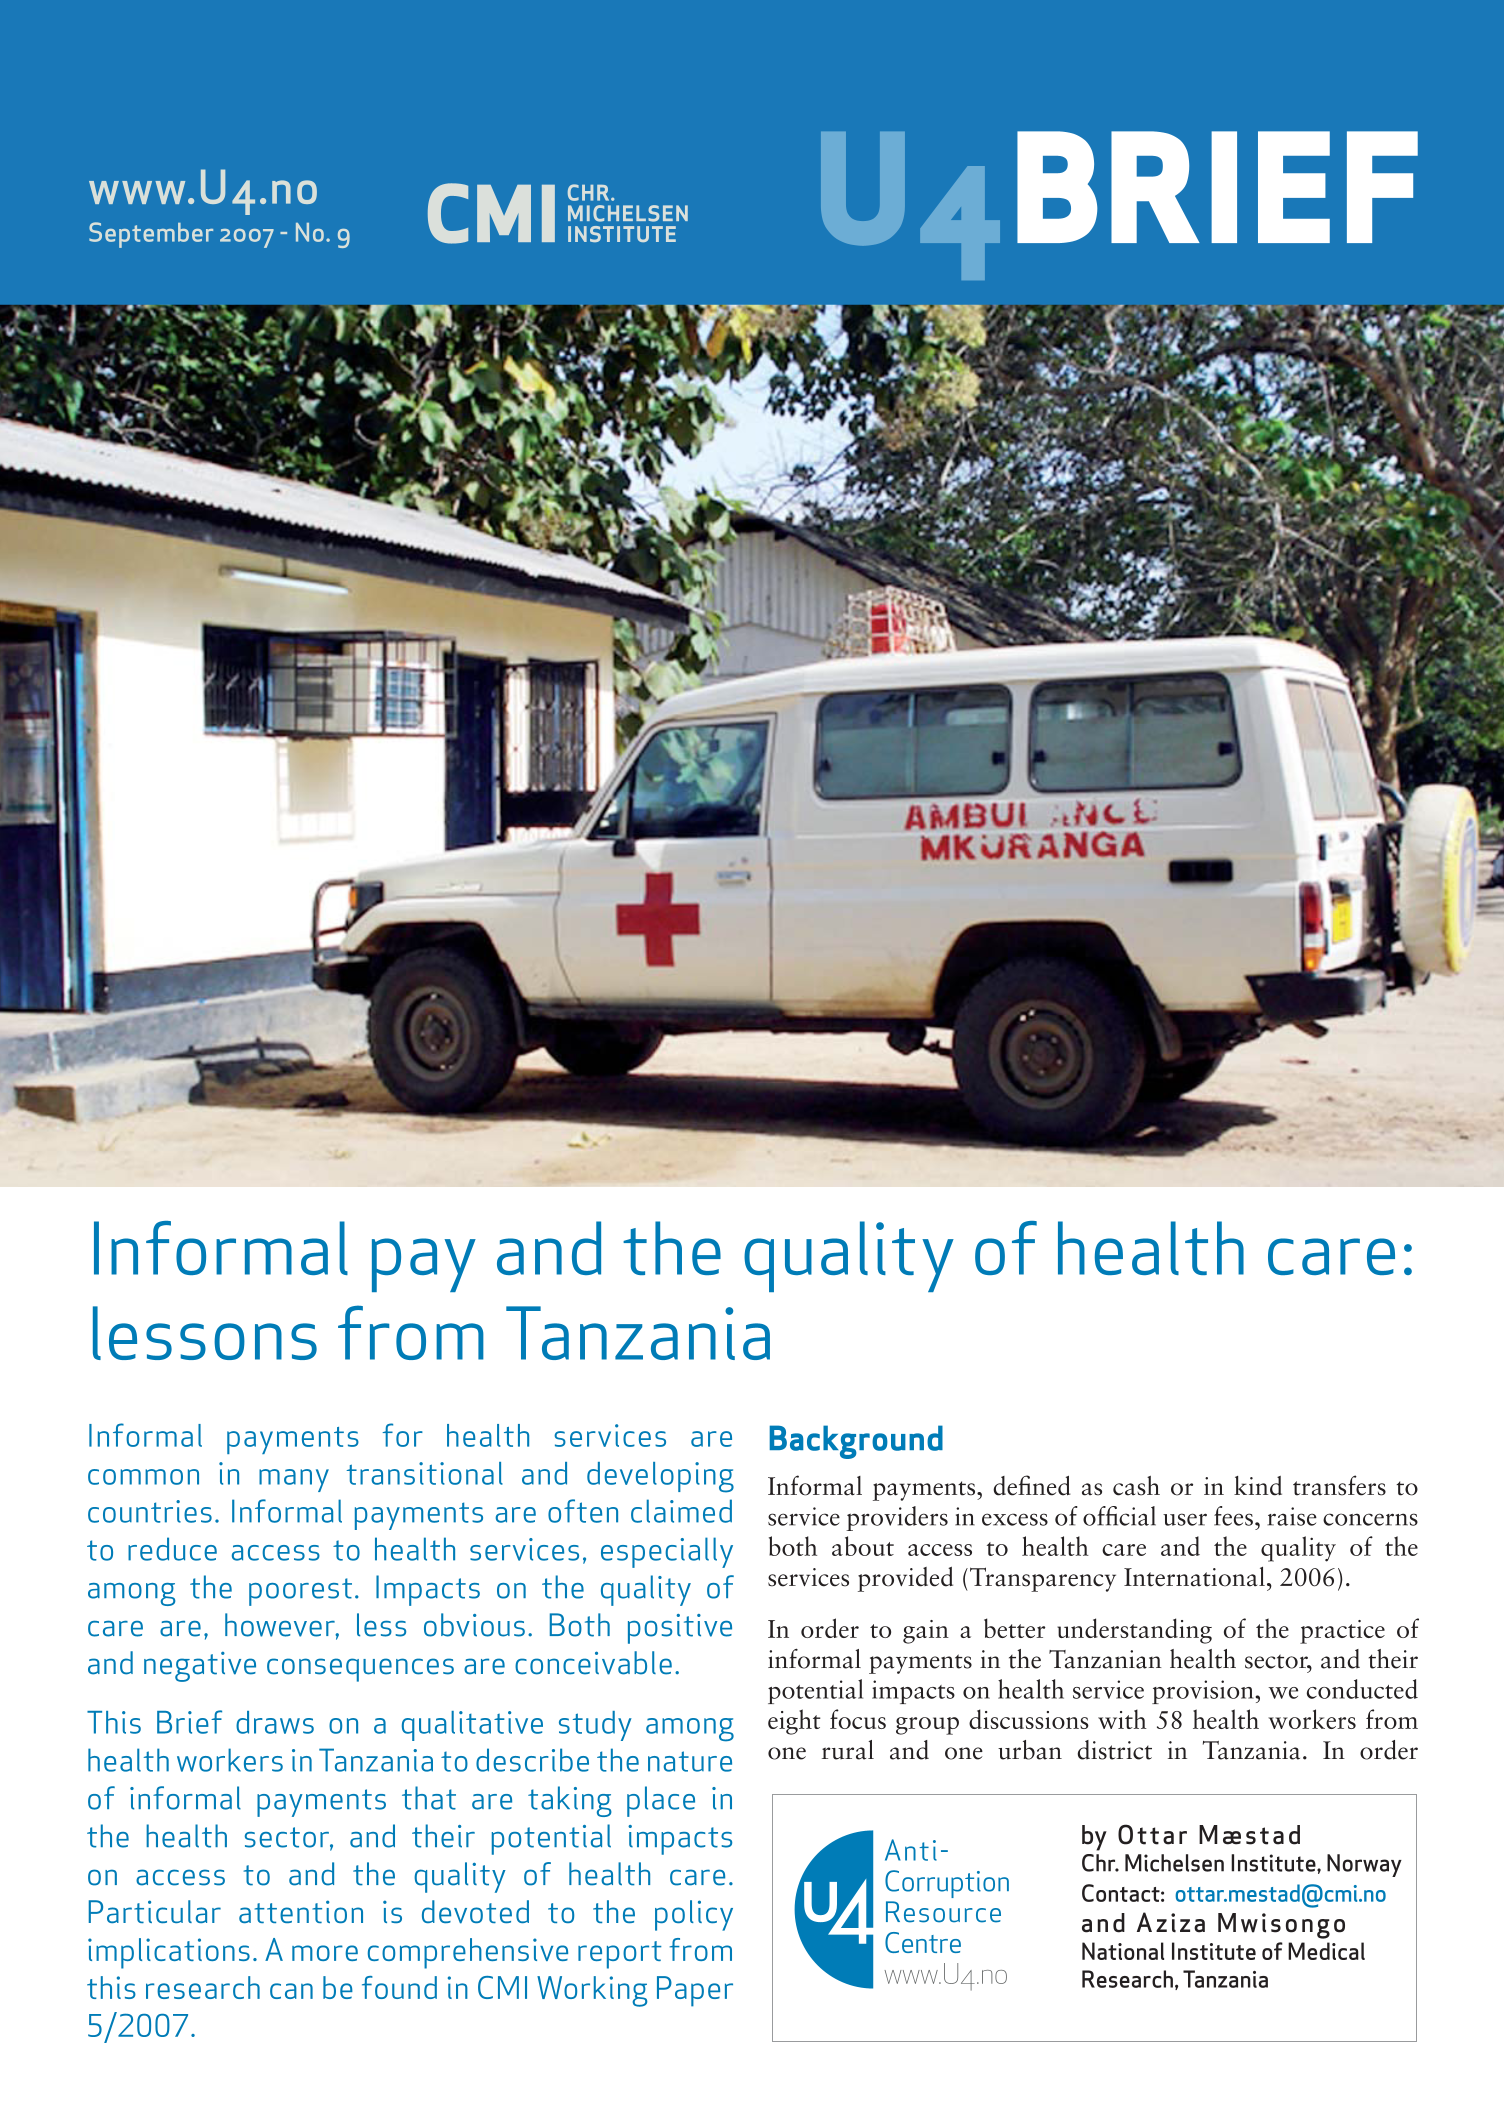 Informal pay and the quality of health care: lessons from Tanzania